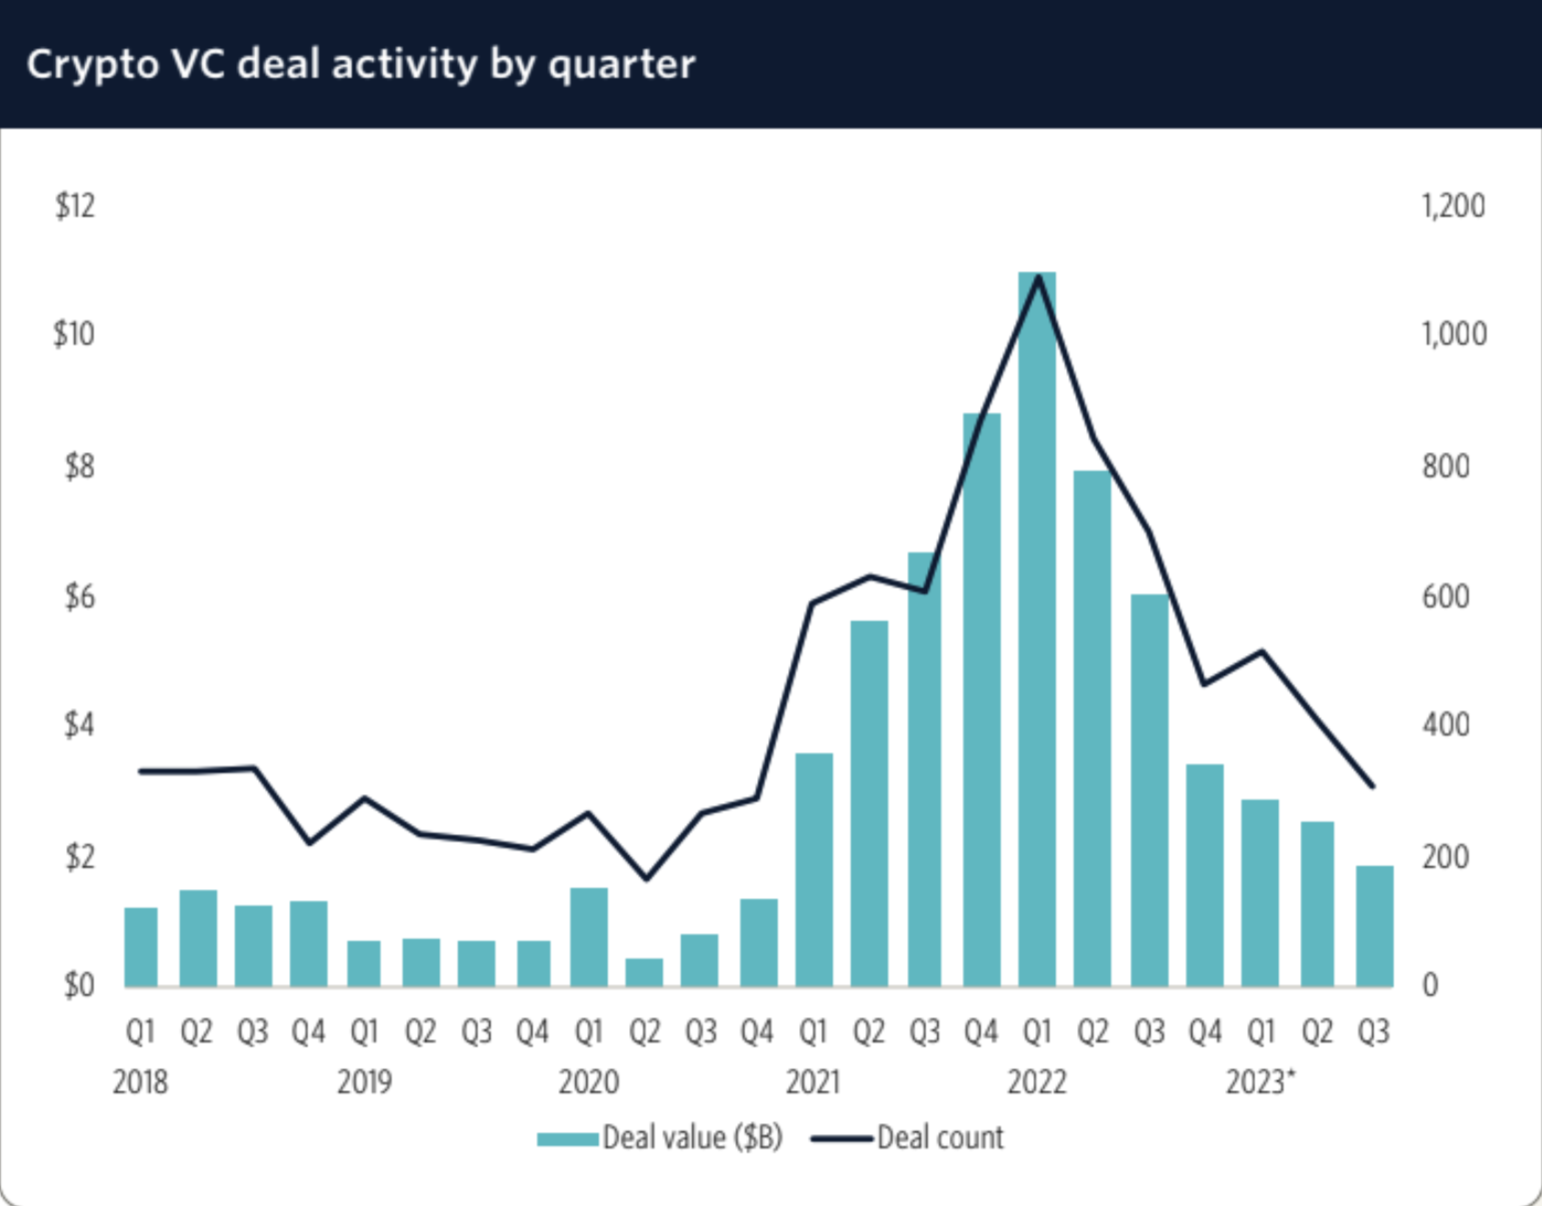 PitchBook crypto VC deal activity by quarter as of September 30, 2023